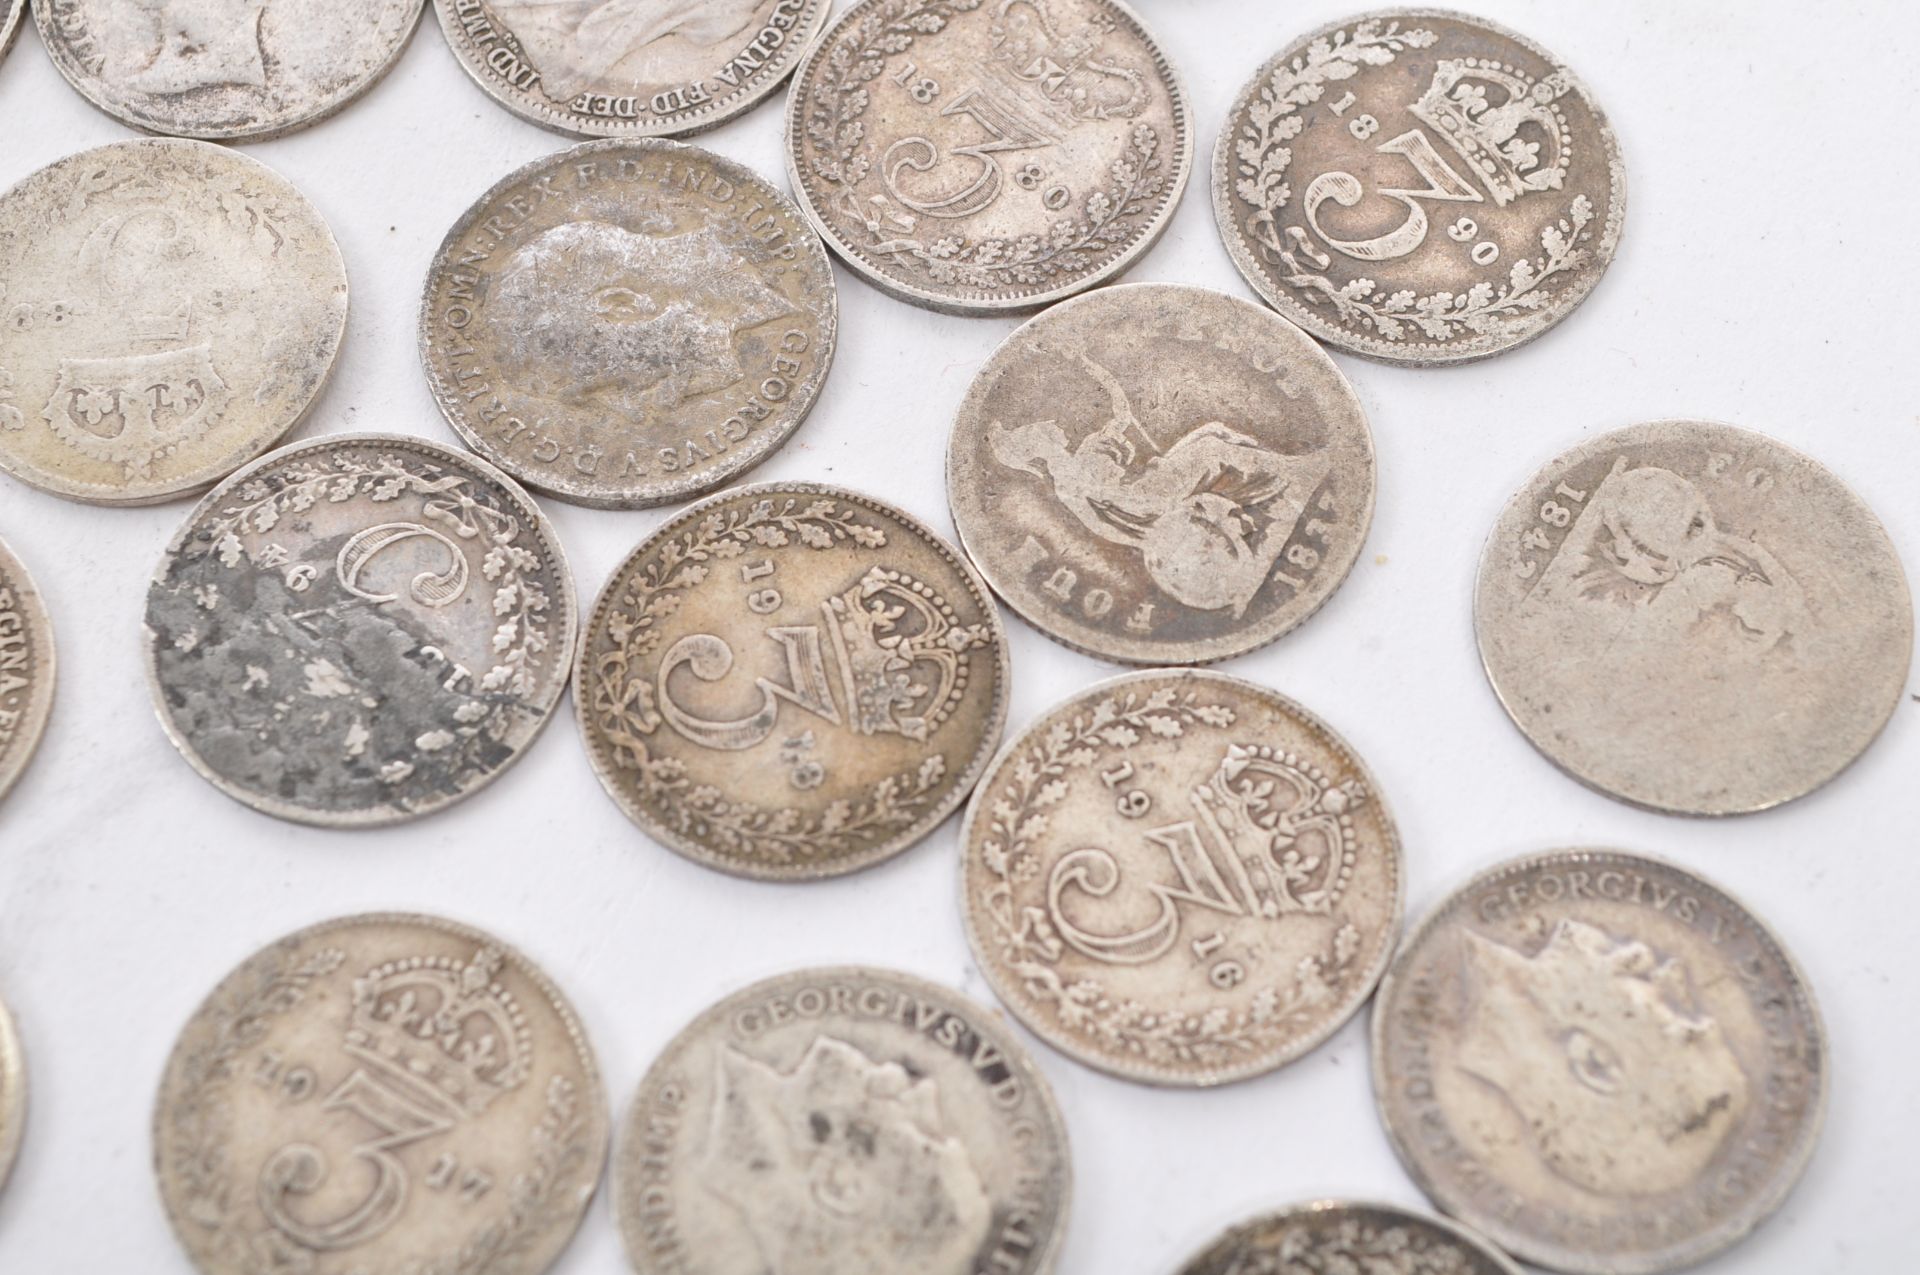 COLLECTION OF 19TH AND 20TH CENTURY SILVER THREE PENCE COINS - Image 7 of 8